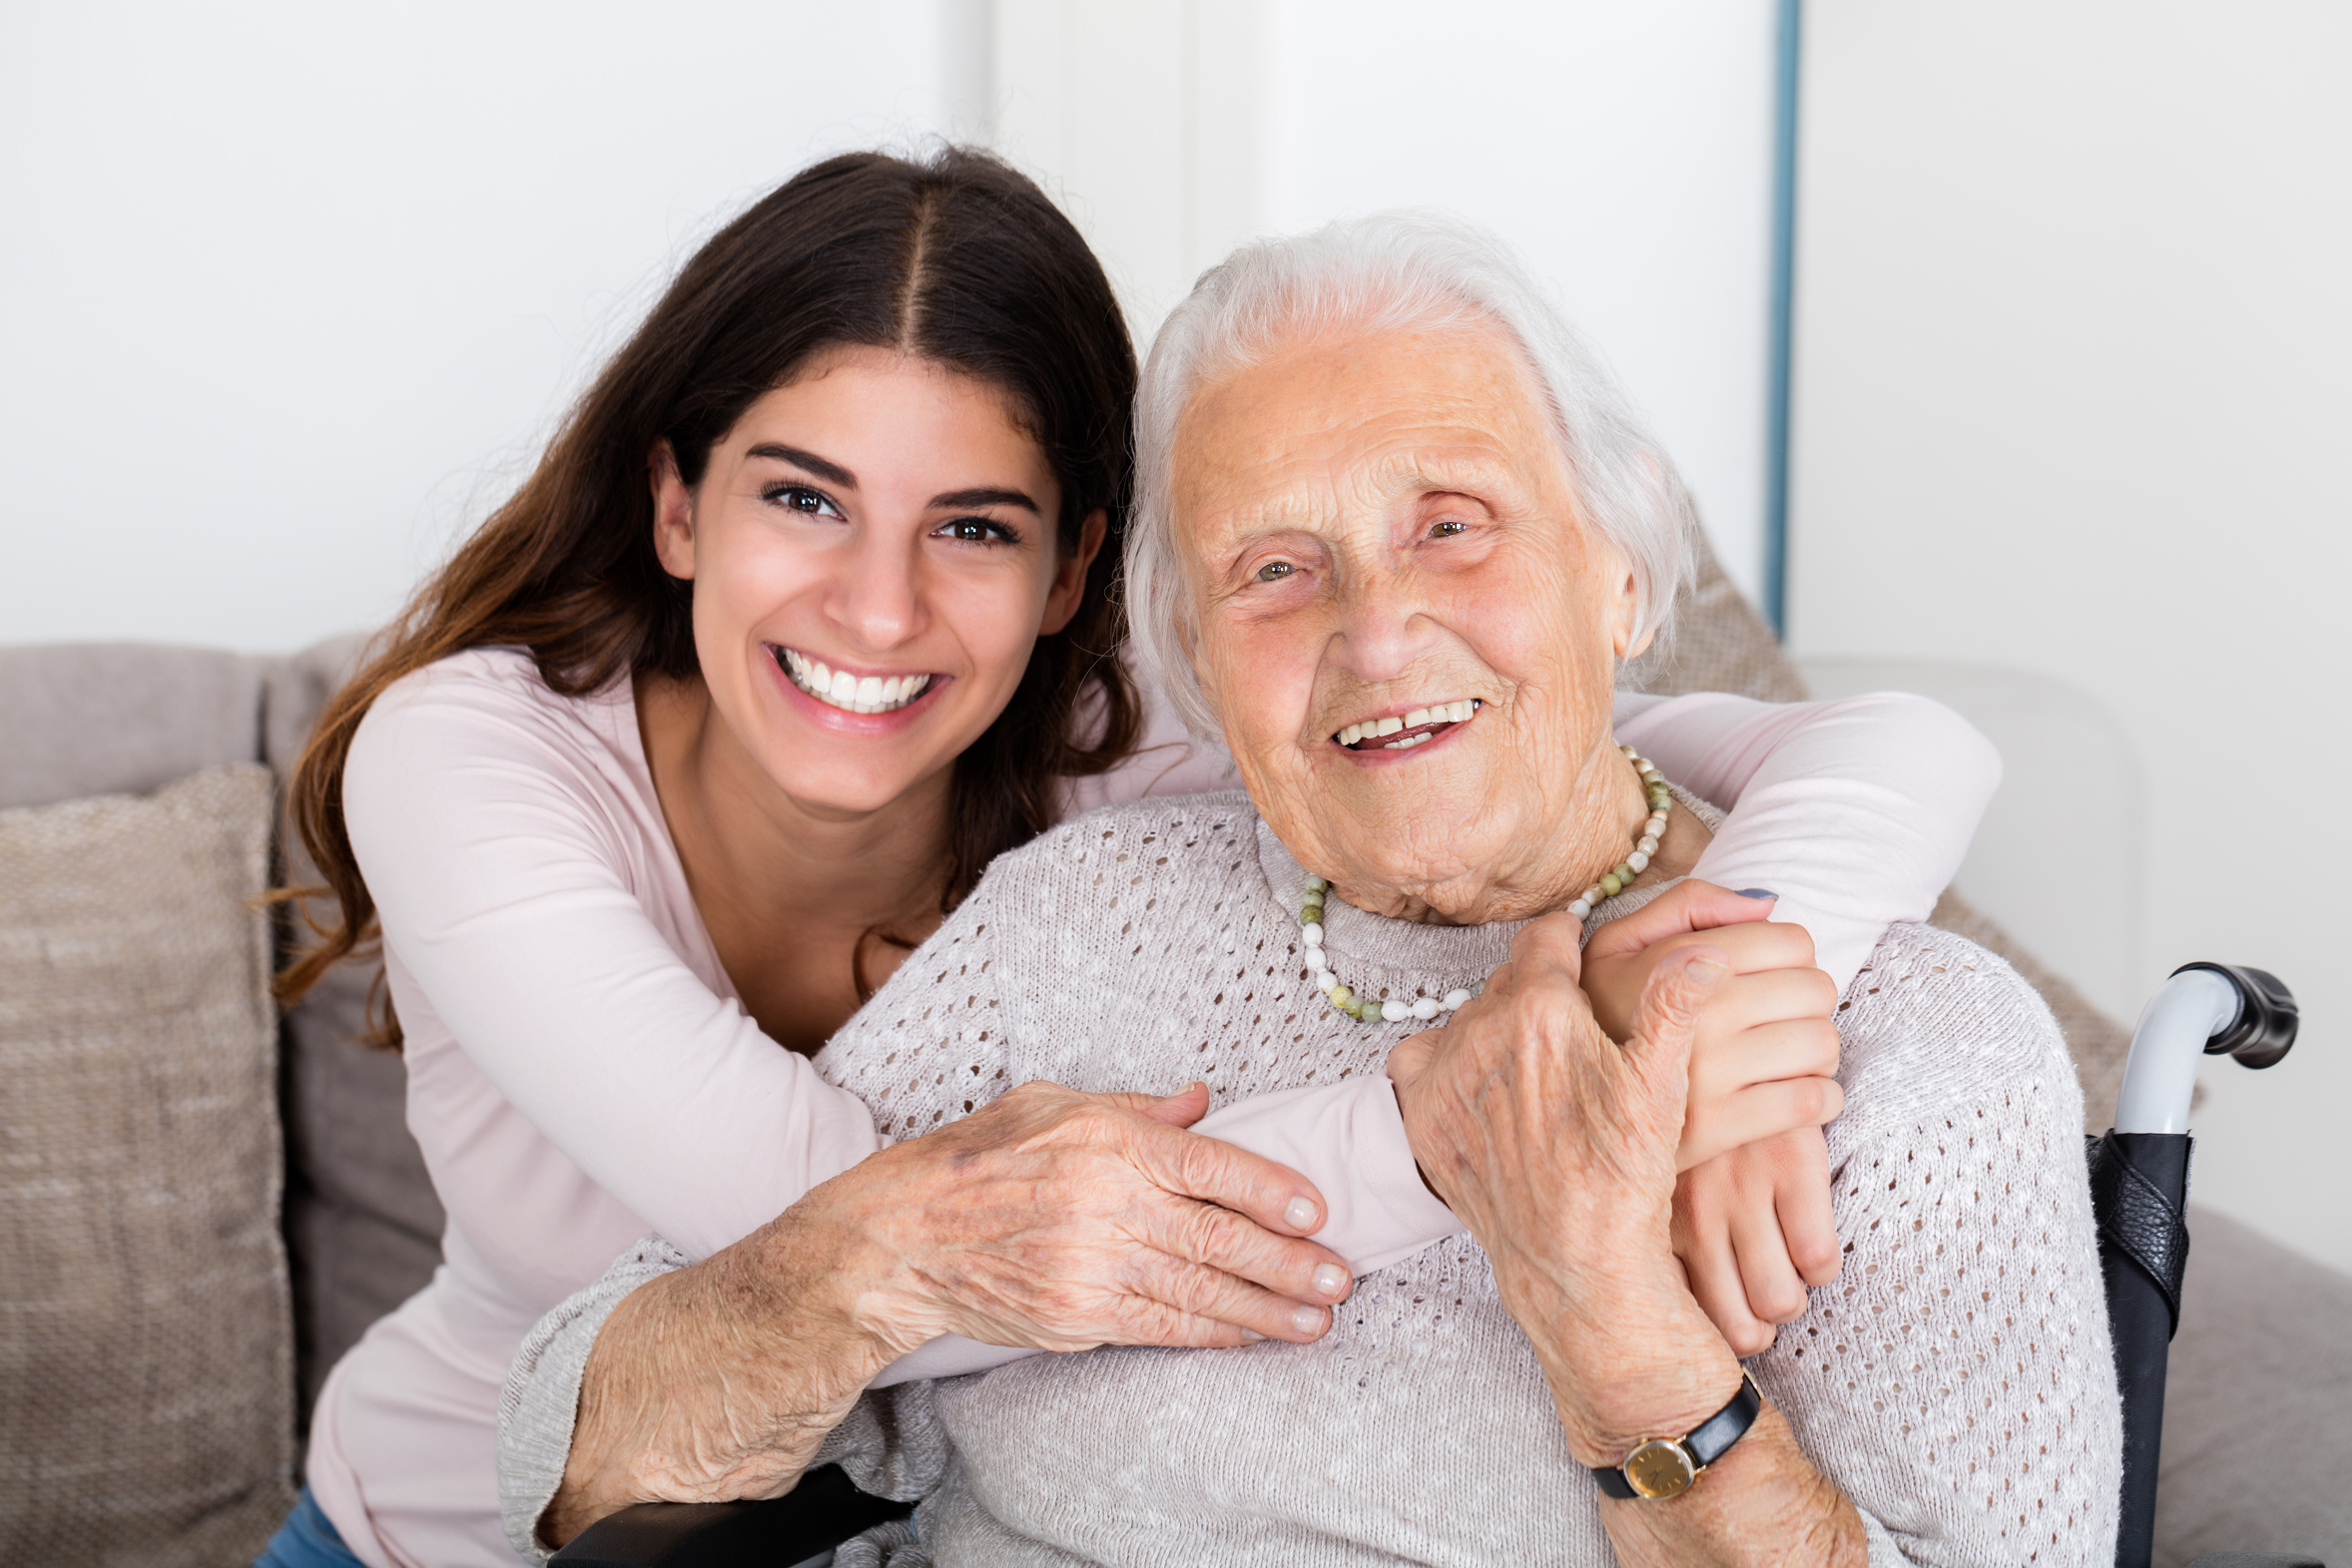 Portrait Of Happy Grandmother And Daughter Embracing Each Other At Home